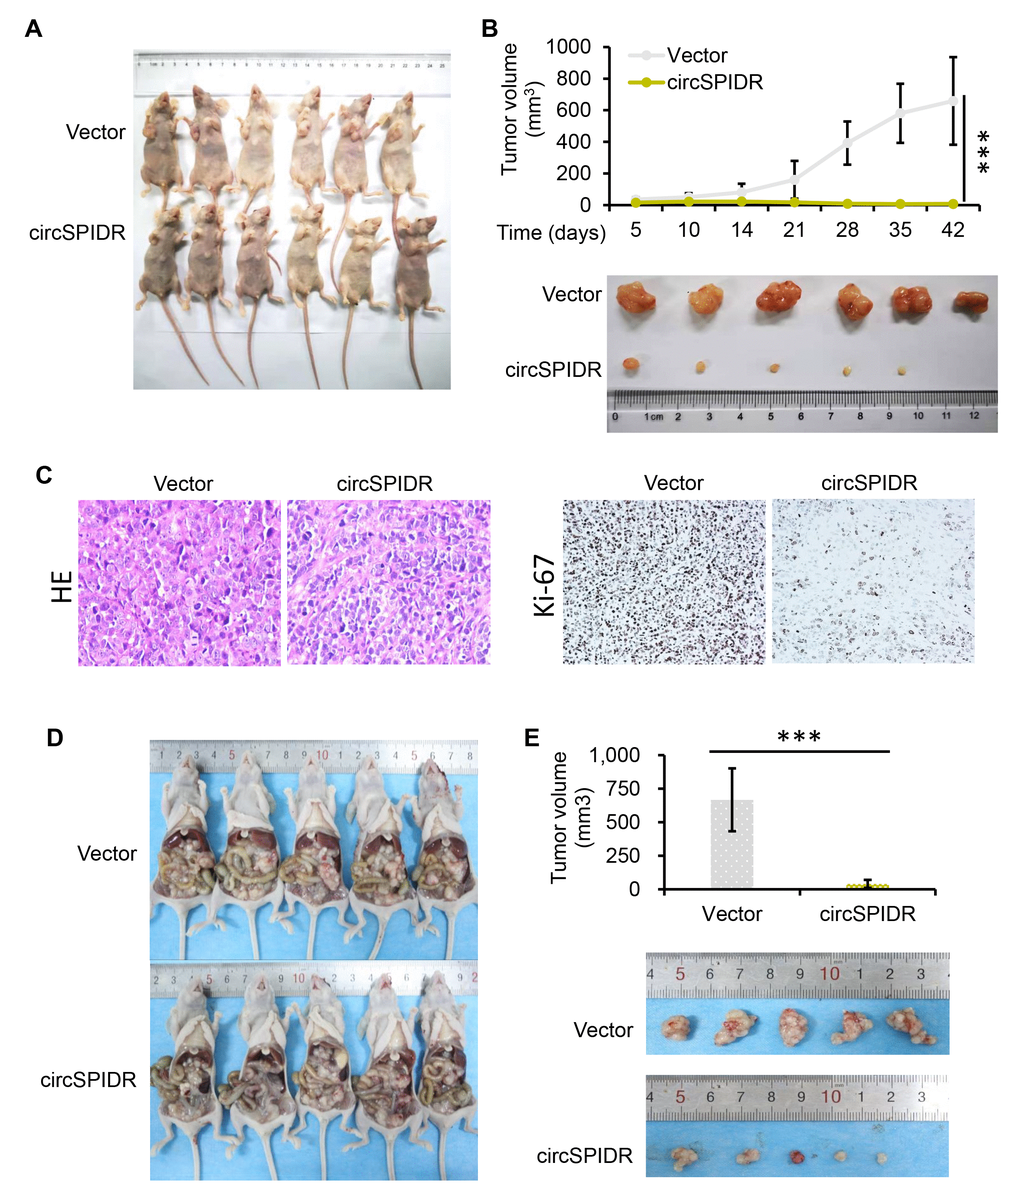 CircSPIDR overexpression inhibits HeLa cell growth in vivo. (A) HeLa cells expressing circSPIDR or the vector control were inoculated into BALB/c nude mice (n = 6/group) to establish subcutaneous xenograft tumors. Representative images of nude mice bearing CADC tumors are shown. (B) Growth curves and representative images of isolated xenograft tumours. The volume of the local tumors was measured. (C) Hematoxylin and eosin staining was performed and Ki-67 protein expression was evaluated in the xenograft tumors. (D, E) Representative images of nude mice intraperitoneally transplanted with HeLa/circSPIDR and HeLa/vector cells. ***P 